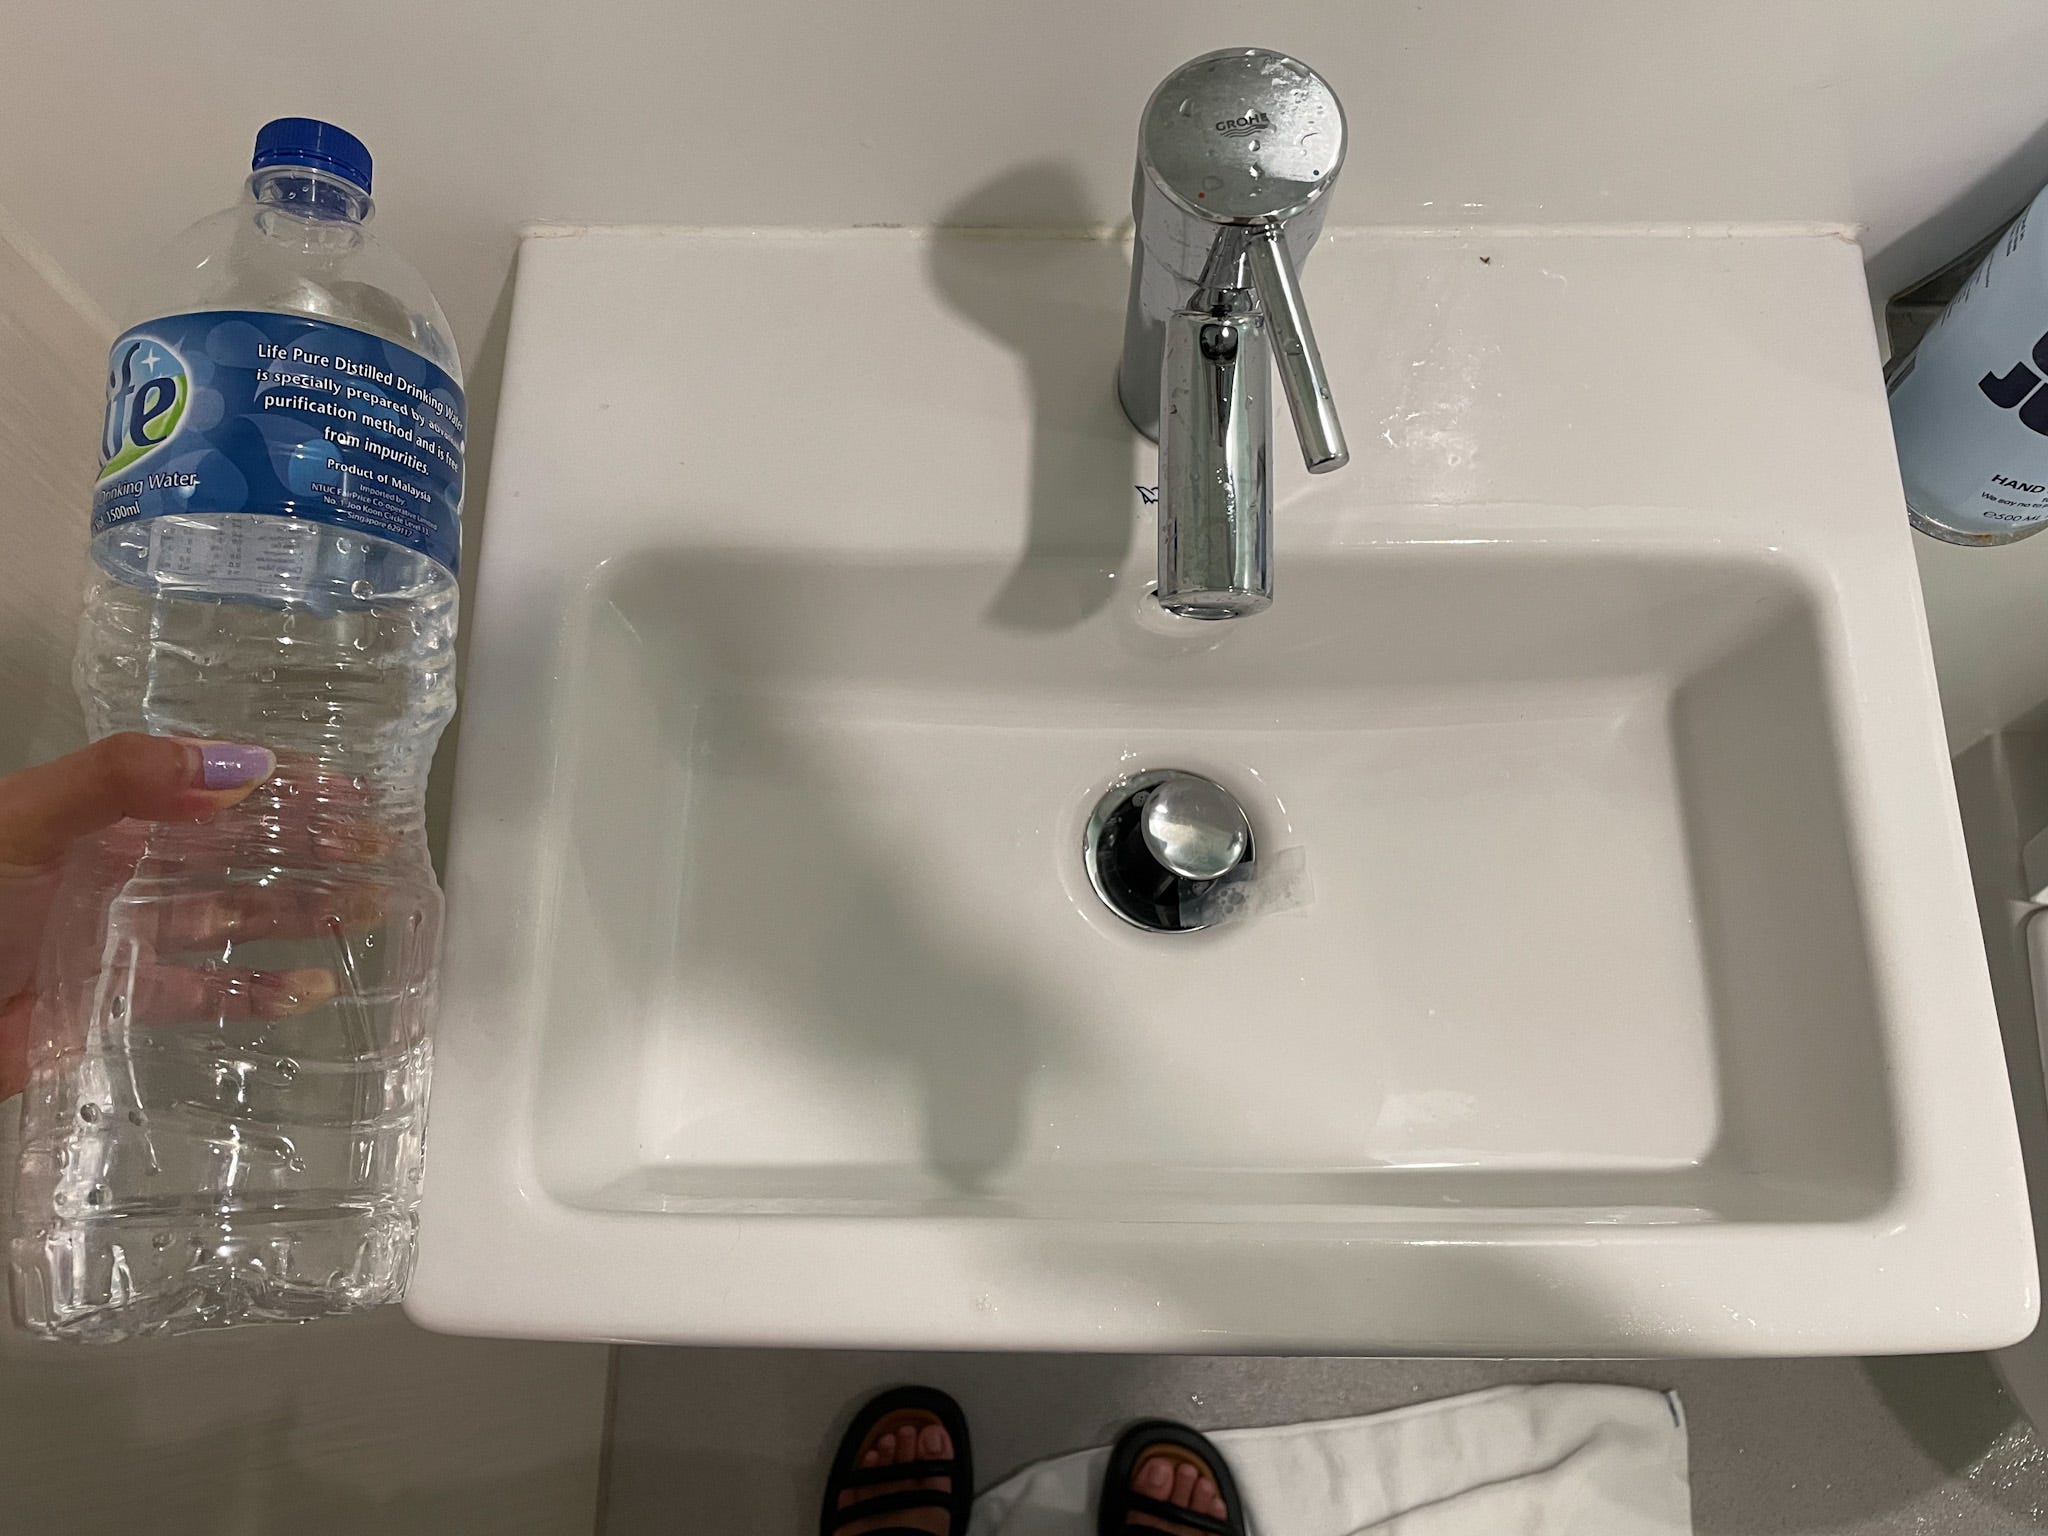 The tiniest hotel room sink ever.